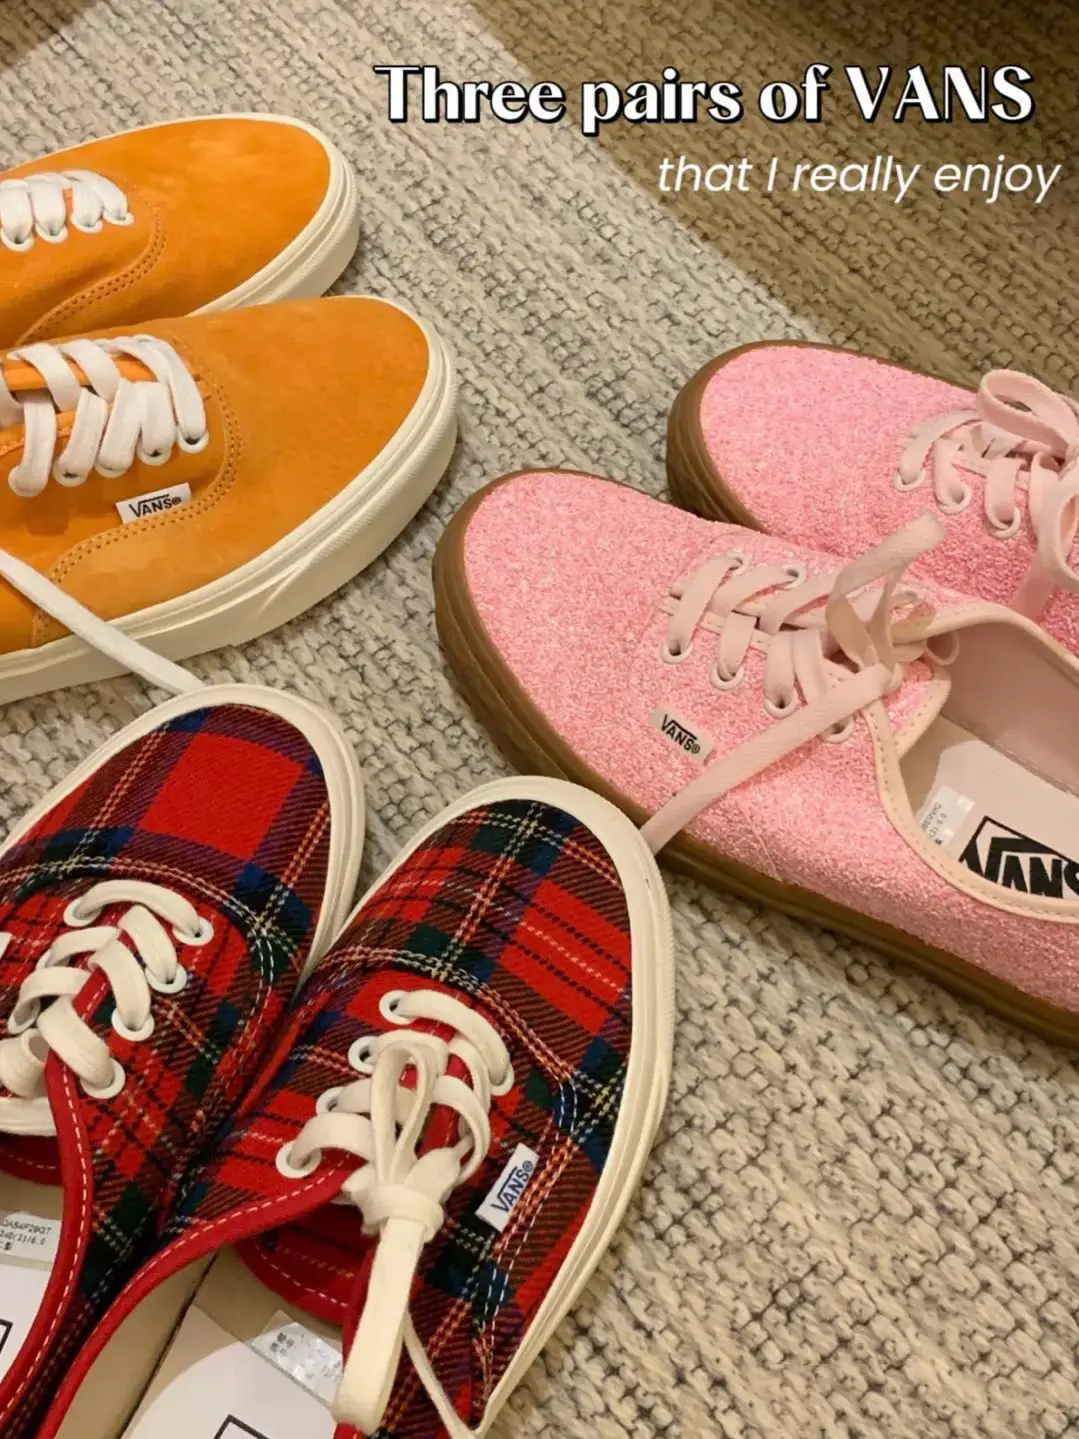 3 pairs of vans posted really | Oliviawardrobe | that enjoy🫶🏻 I Lemon8 by Gallery